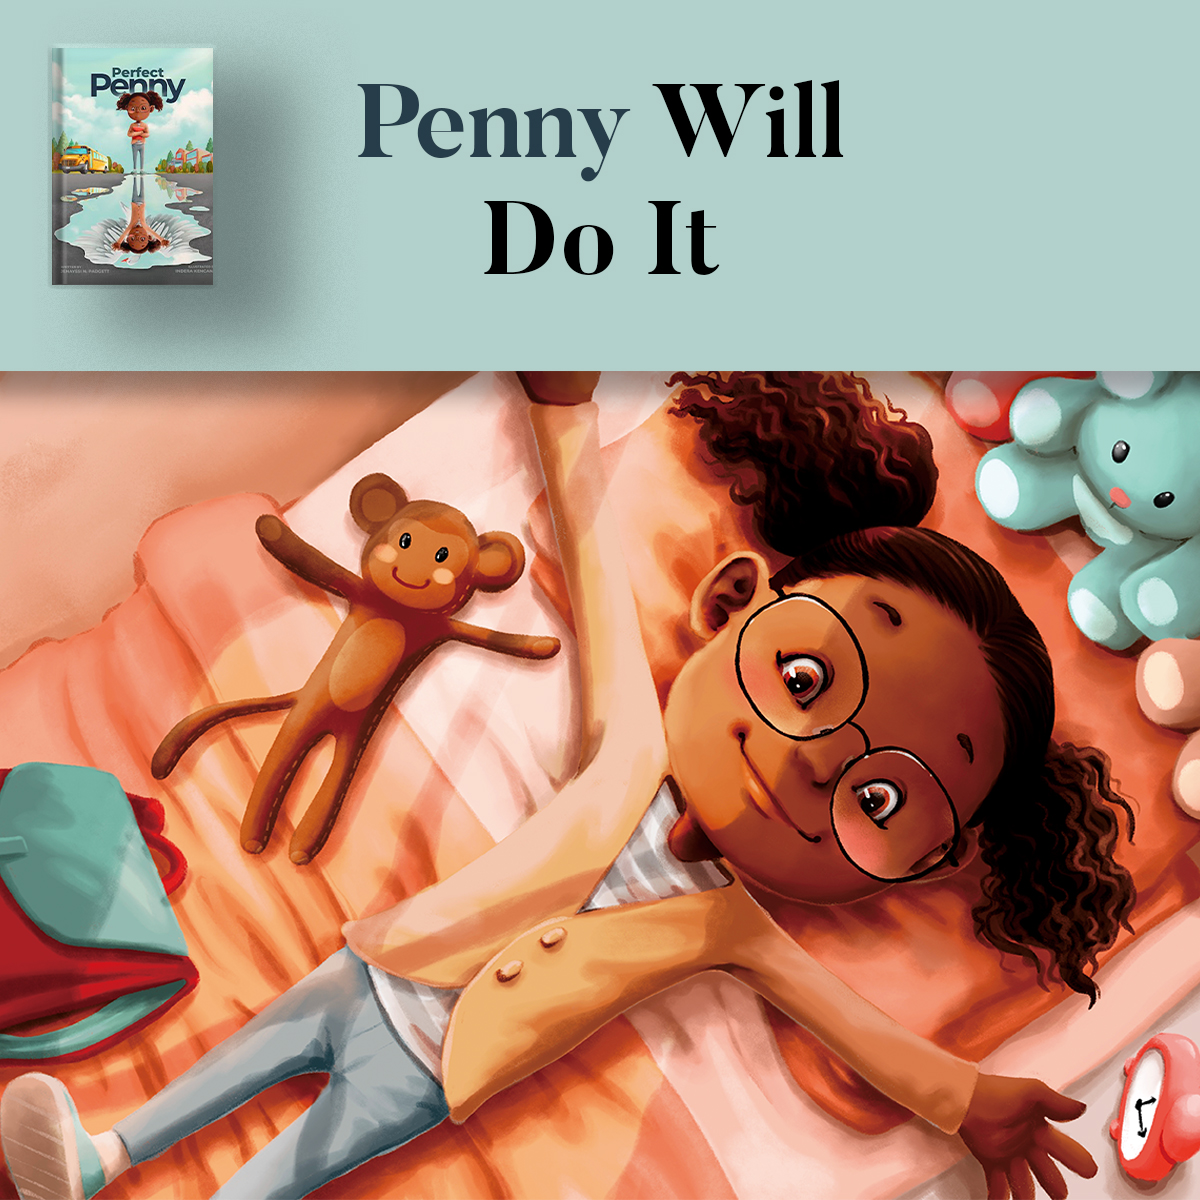 From That Day On, Penny Always Did. Get a copy of the book Perfect Penny written by Jenayssi Padget now by clicking the link perfectpennyseries.com #perfectpenny #childrenbook #author #booklaunch #newbook #authorlife #readingcommunity #booklovers #childreneducation